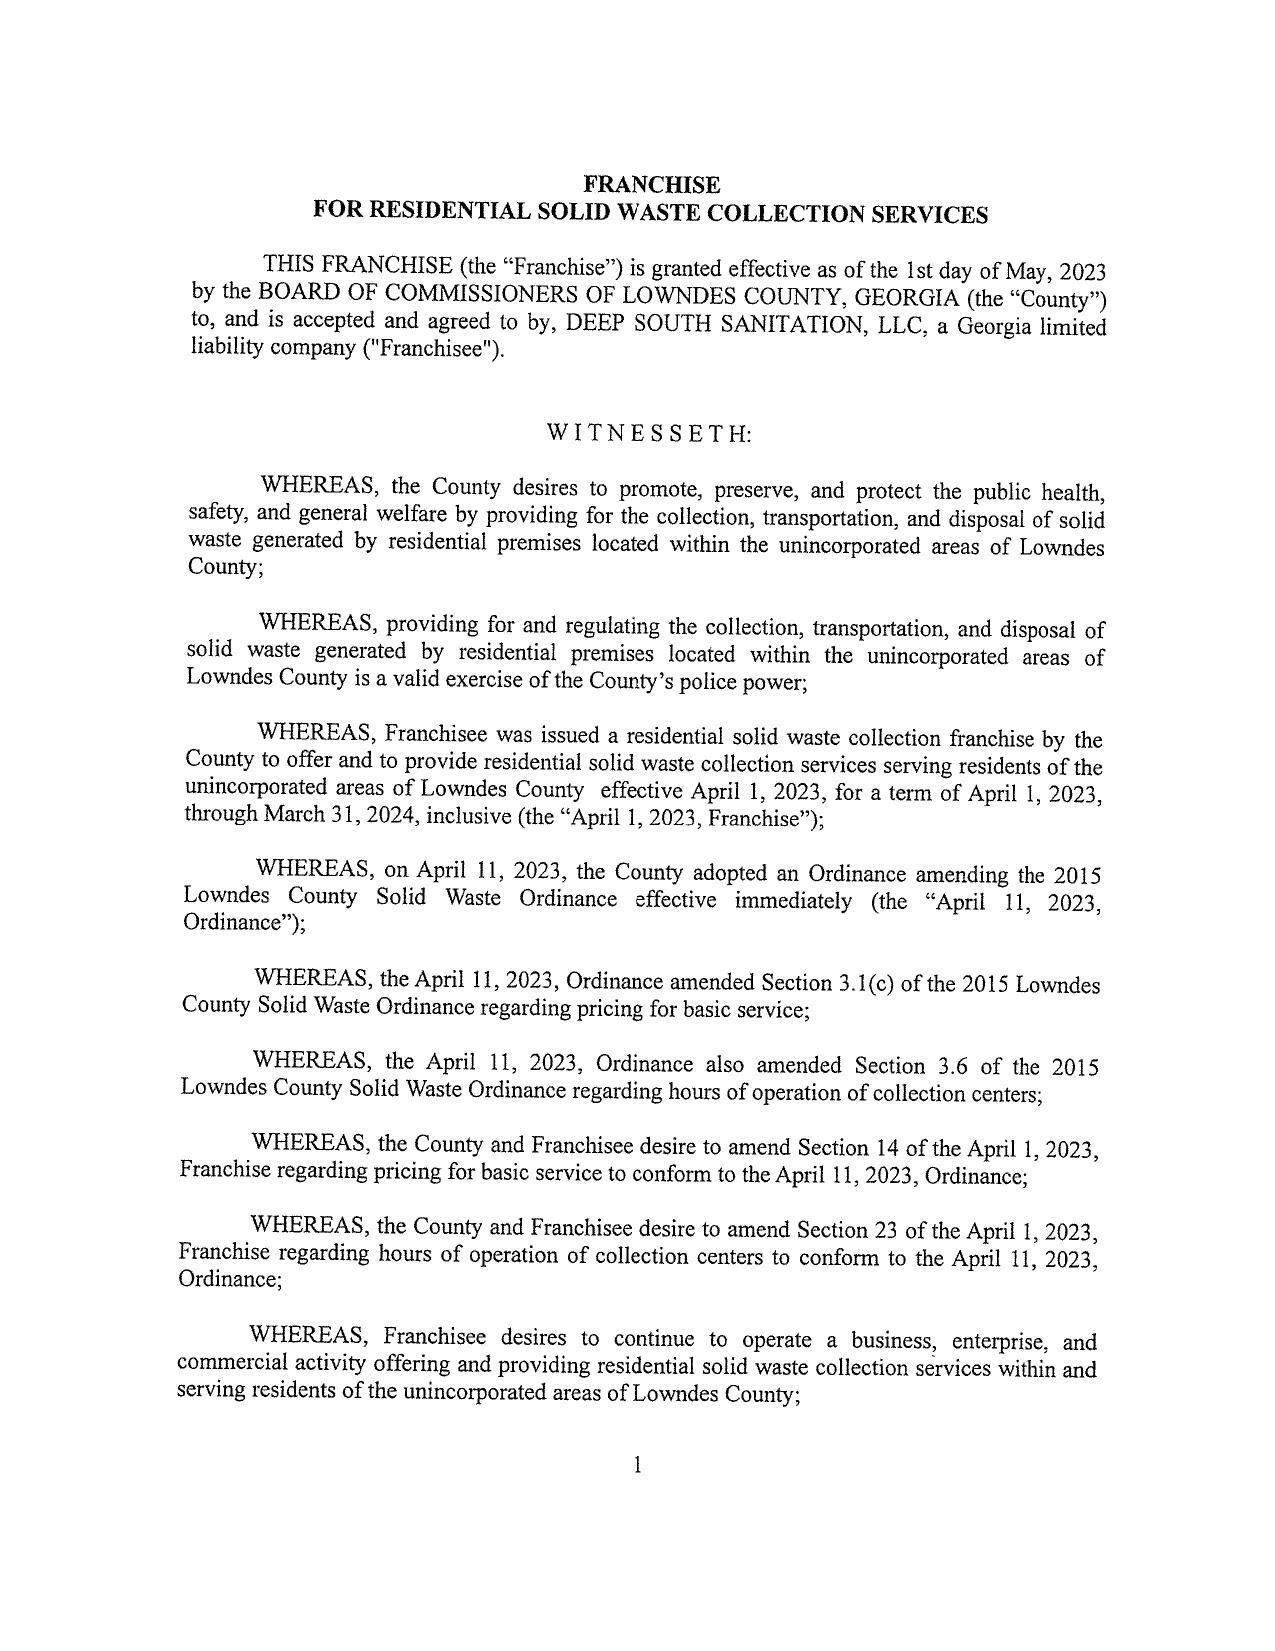 WHEREAS, the April 11, 2023, Ordinance amended Section 3.1(c) of the 2015 Lowndes